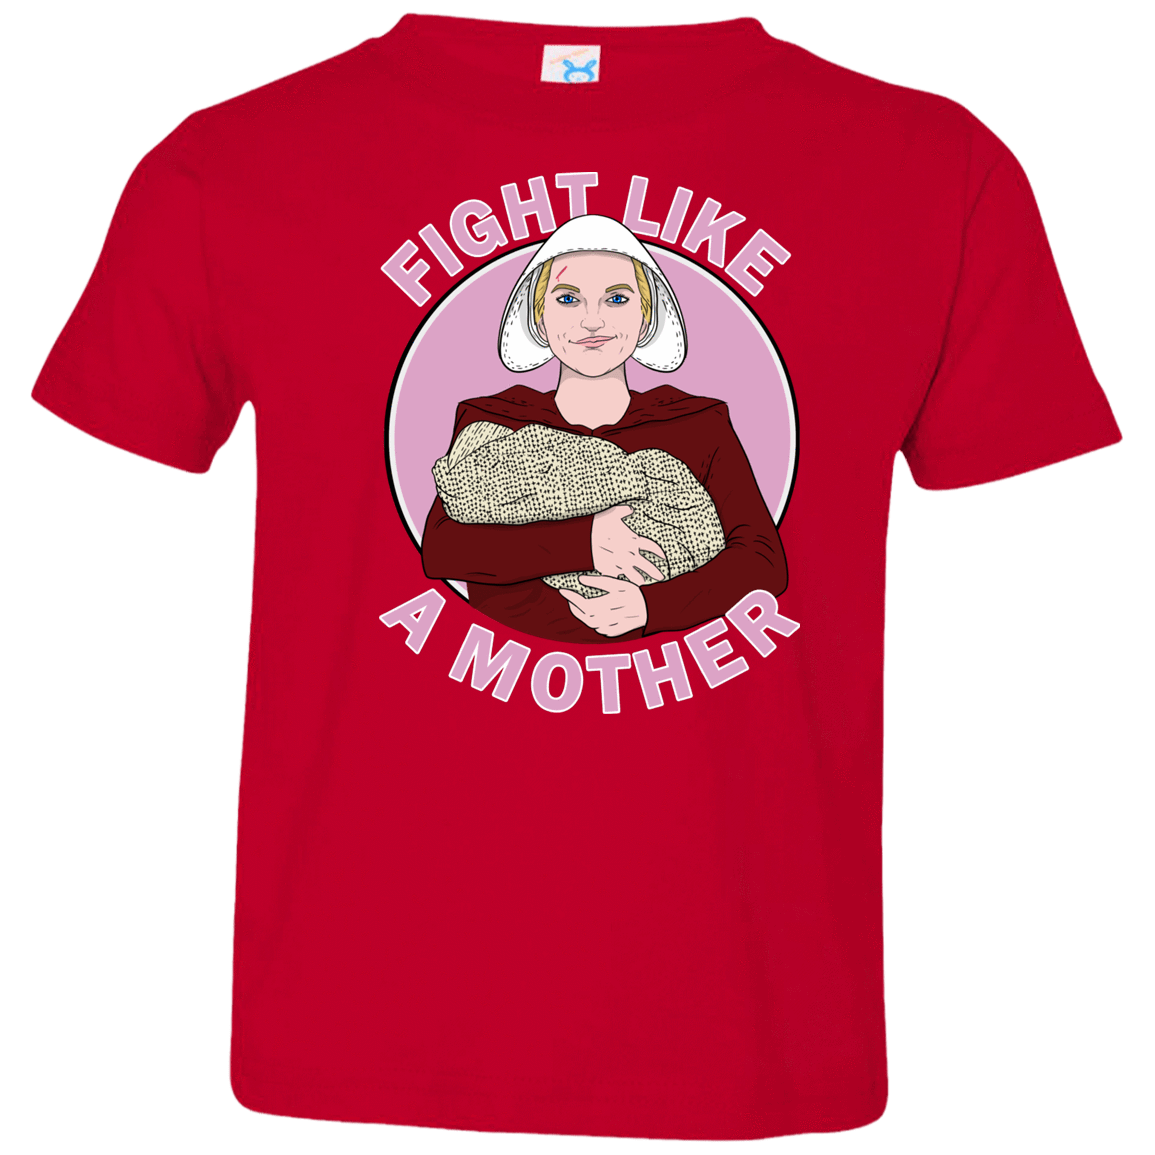 T-Shirts Red / 2T Fight Like a Mother Toddler Premium T-Shirt